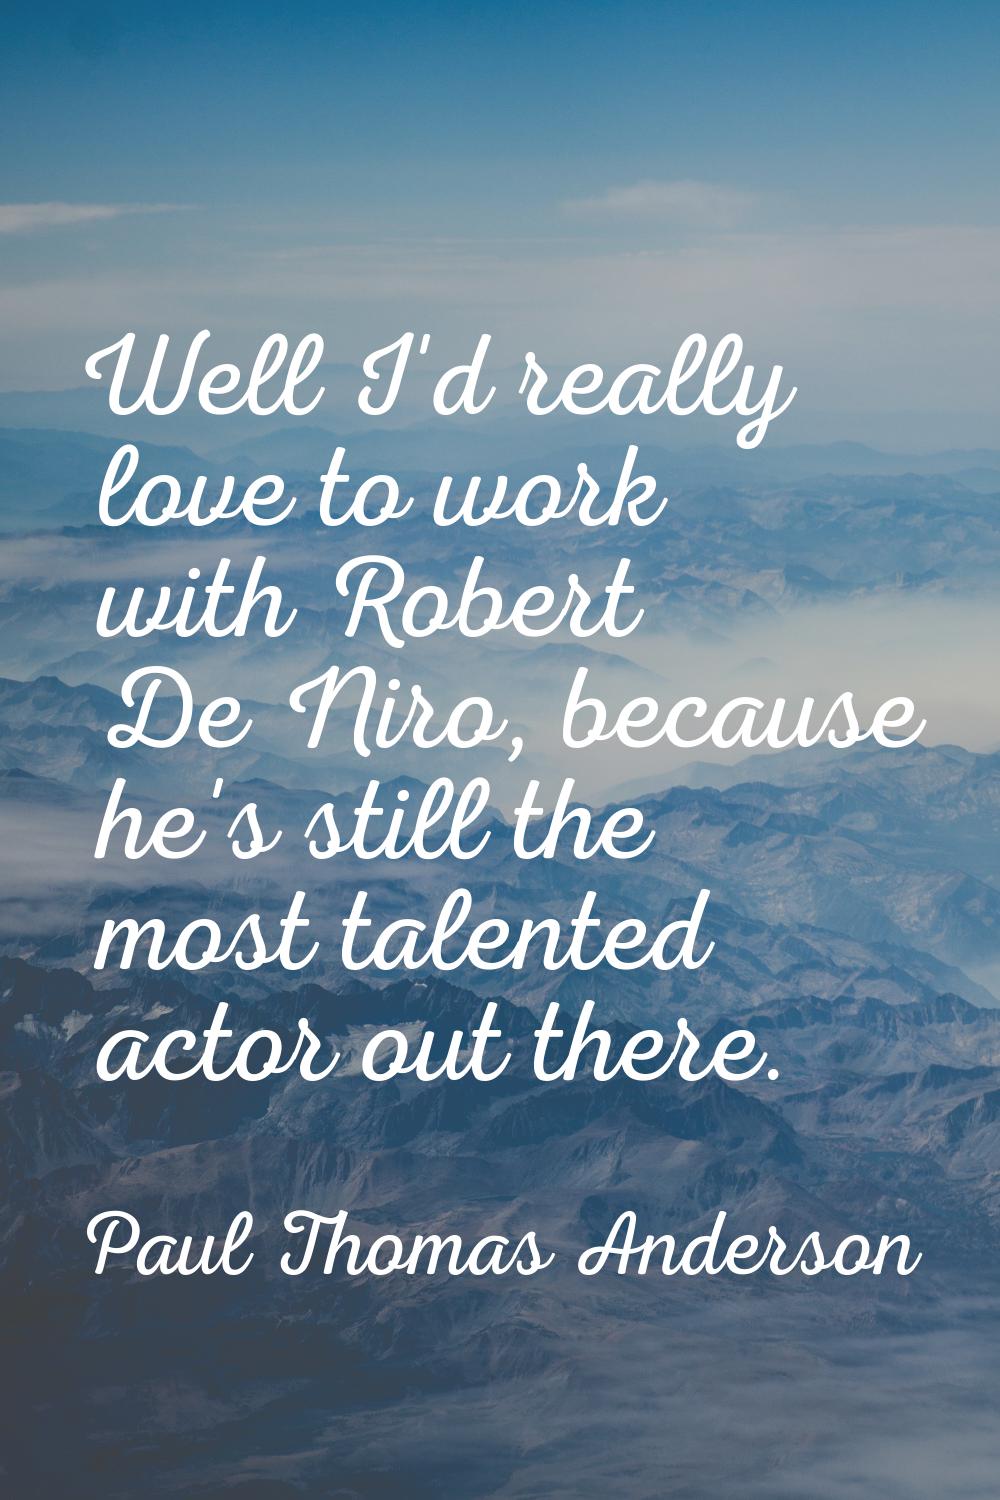 Well I'd really love to work with Robert De Niro, because he's still the most talented actor out th